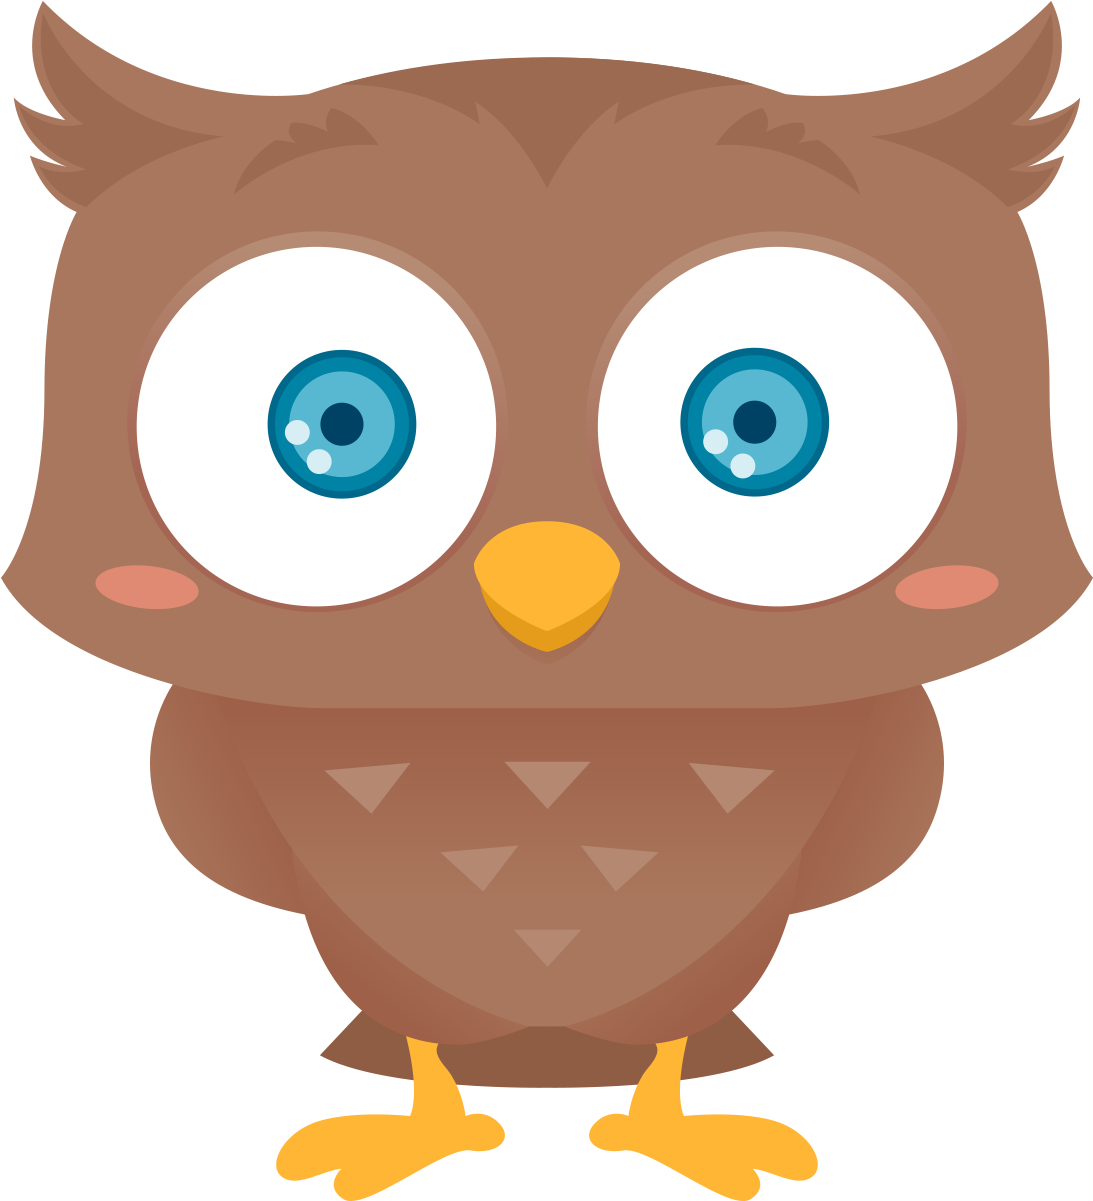 Very Attractive Is Clip Art Free To Use Owl Download - Owl Clip Art Cute (1200x1200)